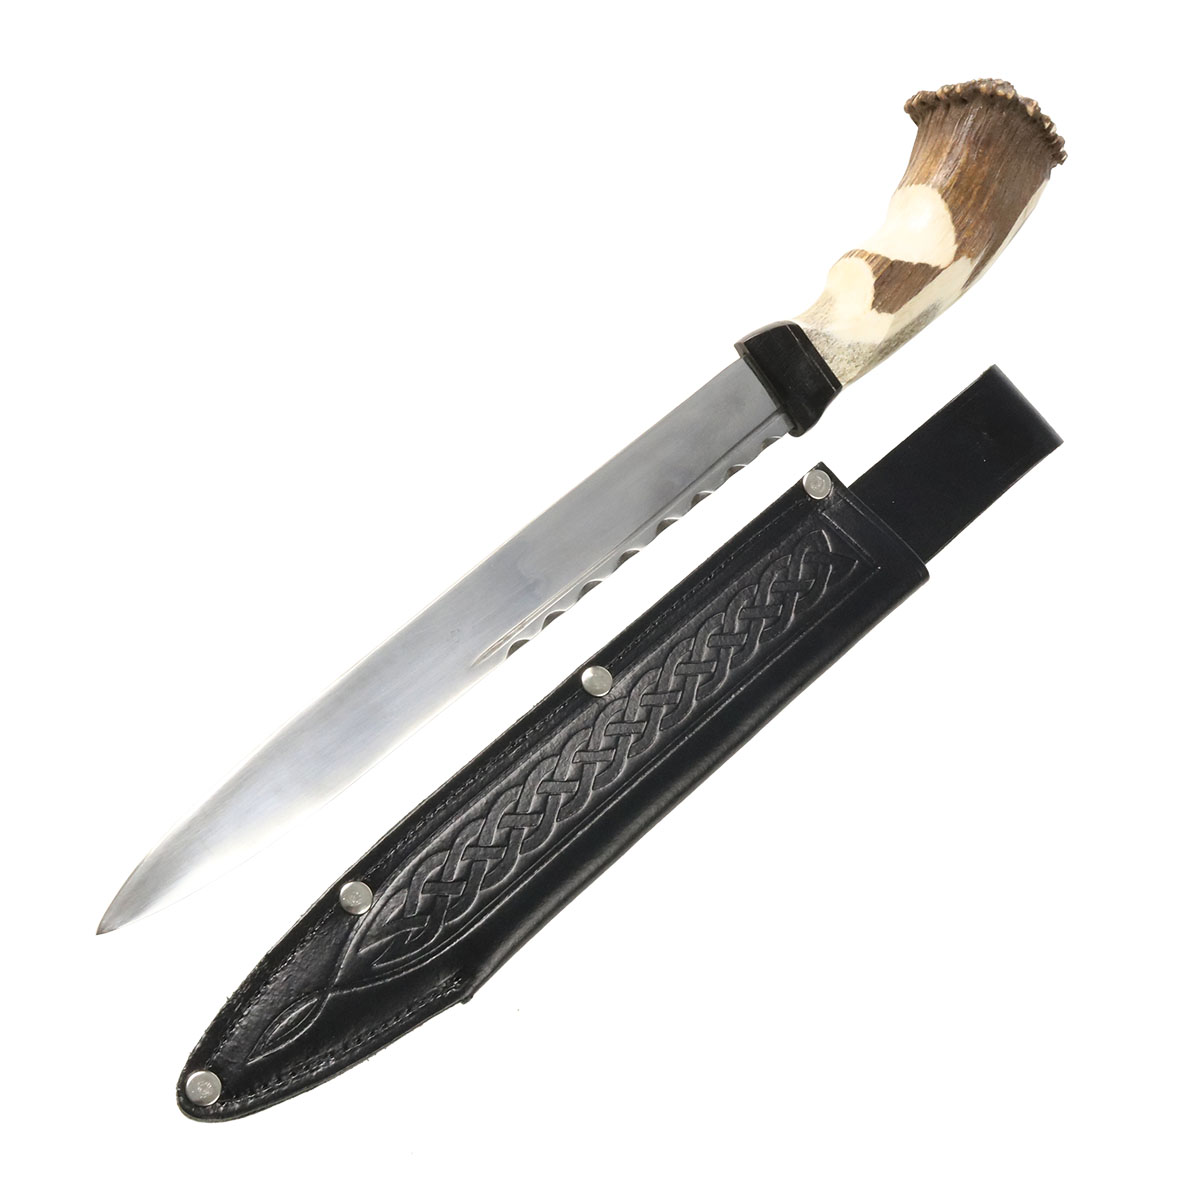 A Genuine Full Crown Stag Handle Carbon Steel Dirk on a white background.